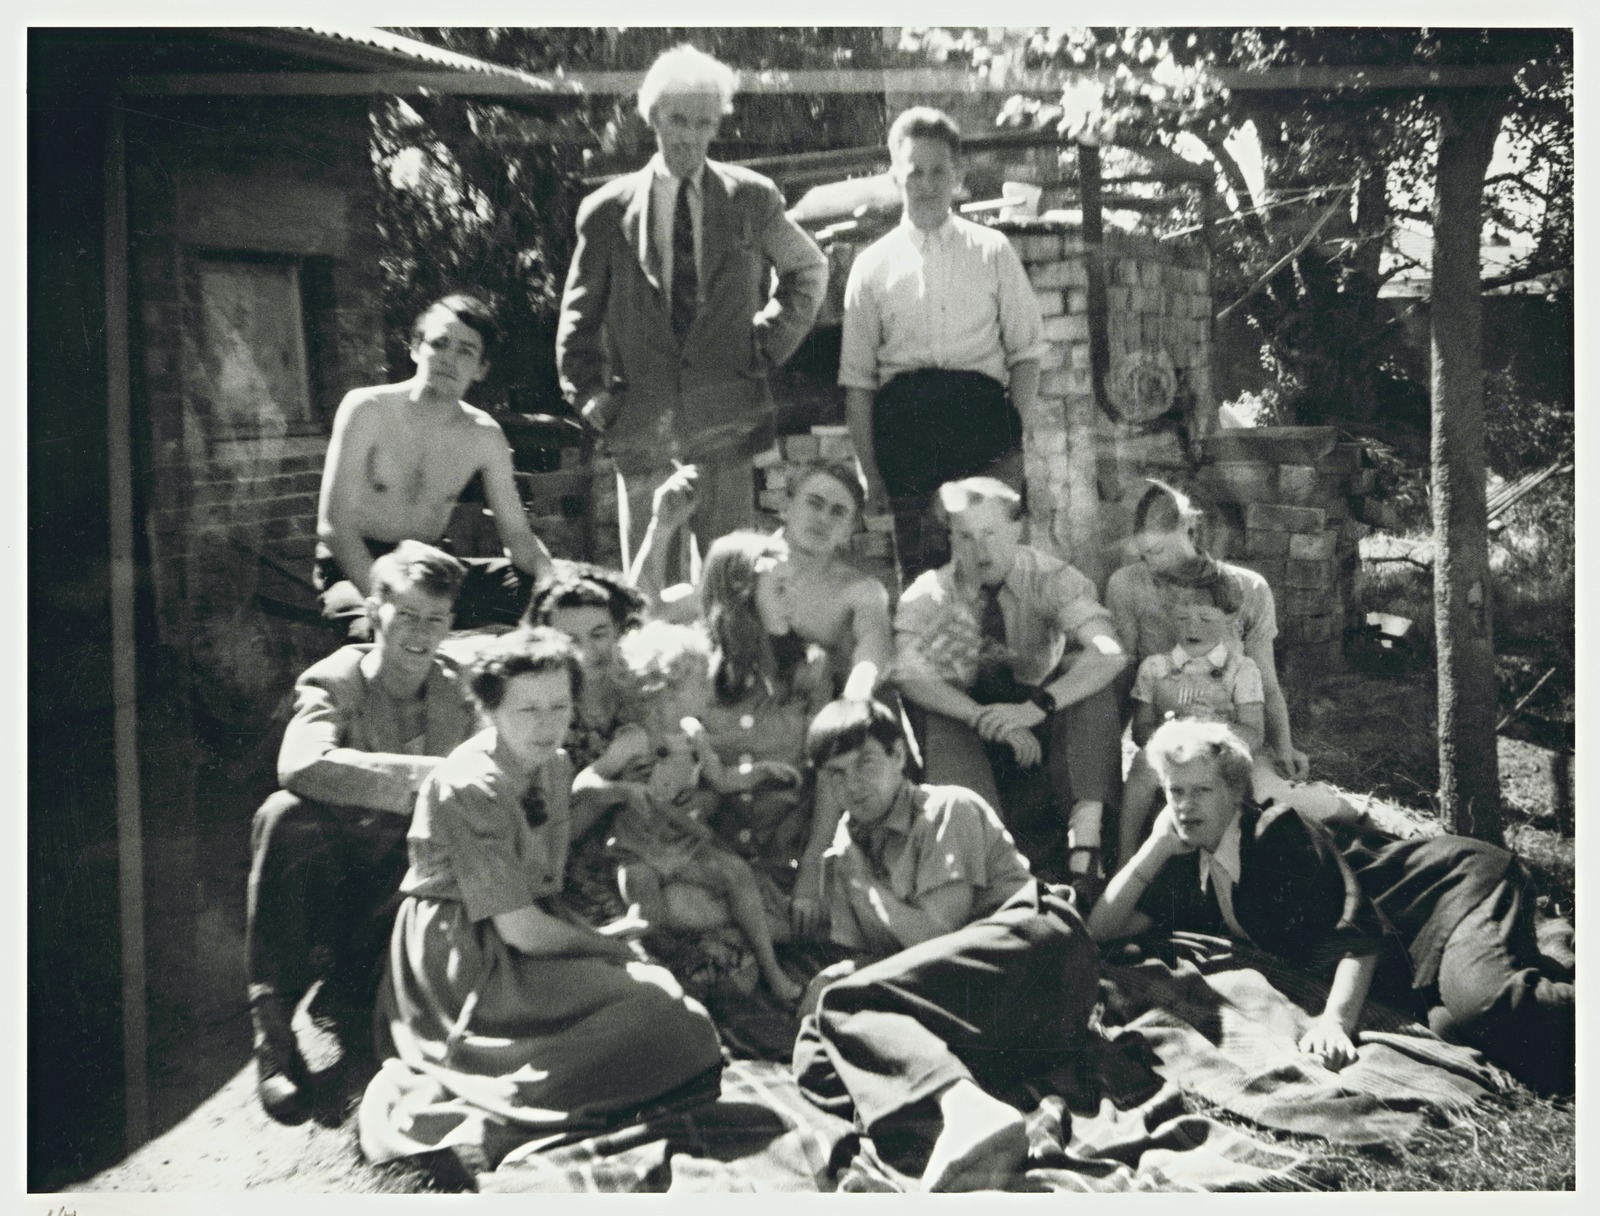 Albert Tucker (1914-1999), Untitled (Family group at Open Country) c.1951, (left to right, back) David Boyd, Merric Boyd, Hatton Beck Centre: Guy Boyd, Lucy Boyd (with child) Mary Boyd, John Perceval, unidentified, Yvonne and son Jamie Boyd, Front: Doris Boyd, Arthur Boyd, Joy Hester Gelatin silver photograph Source: State Library Victoria website